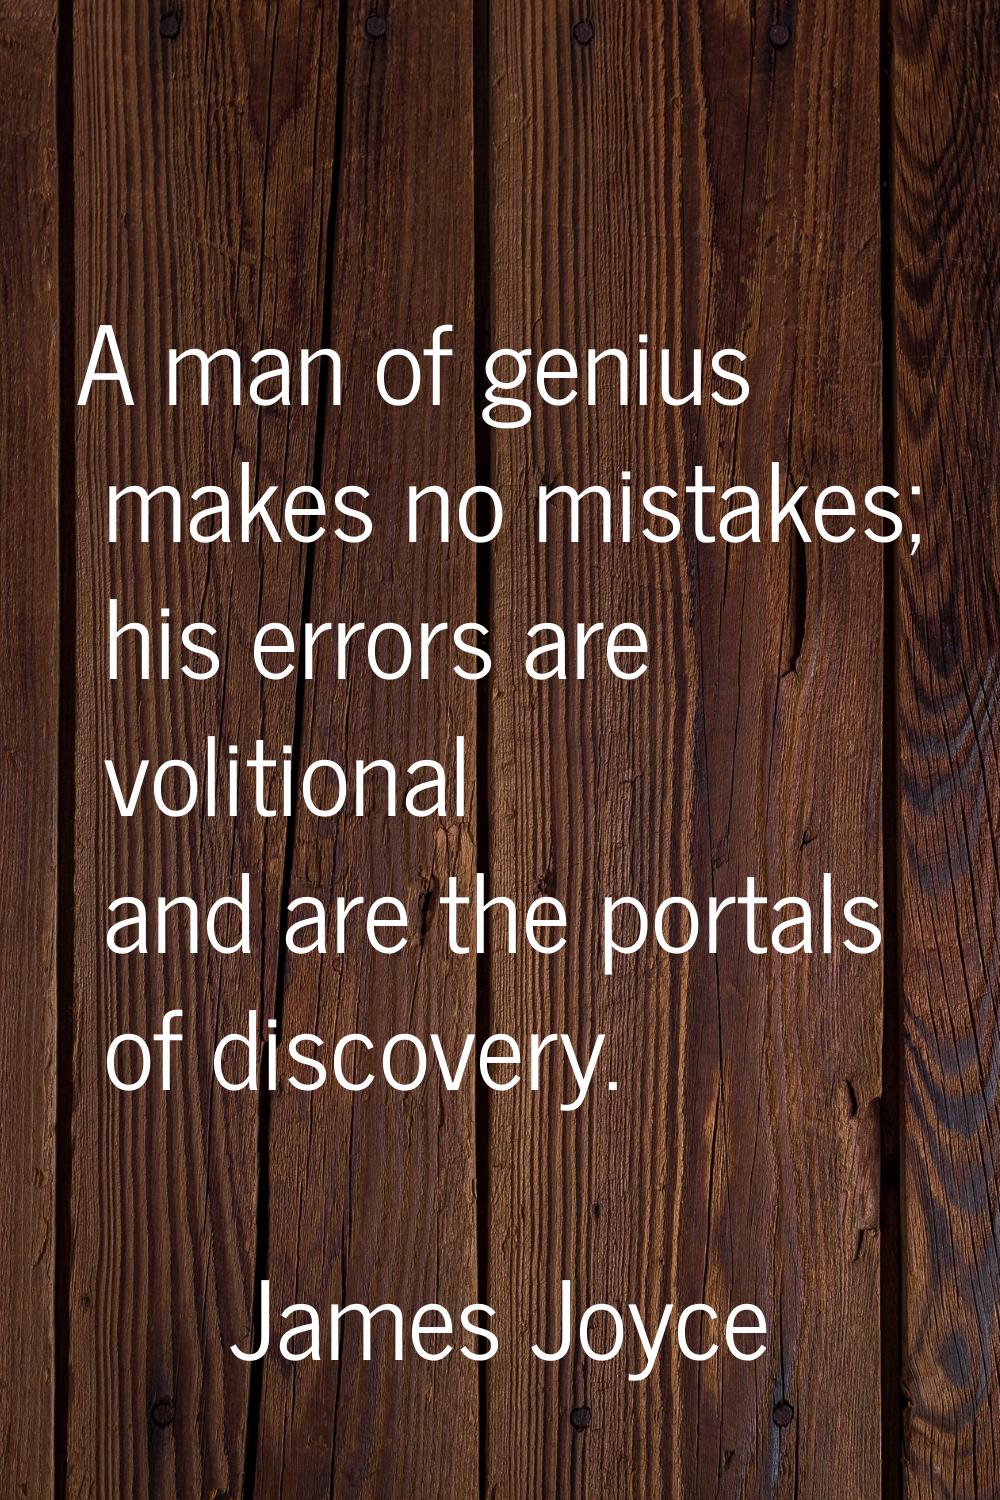 A man of genius makes no mistakes; his errors are volitional and are the portals of discovery.